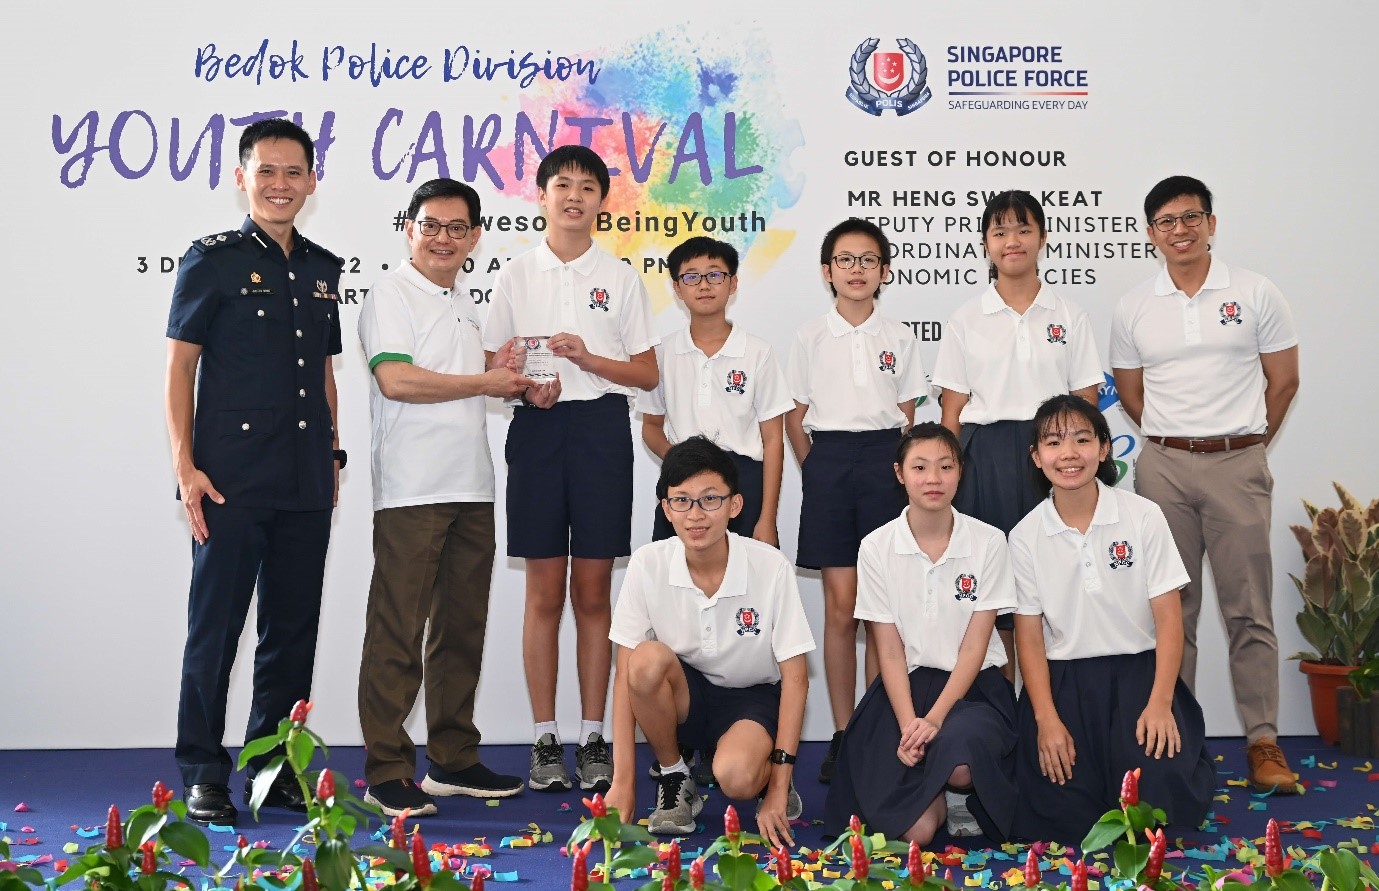 20221208_bedok_police_division_youth_carnival_2022_5